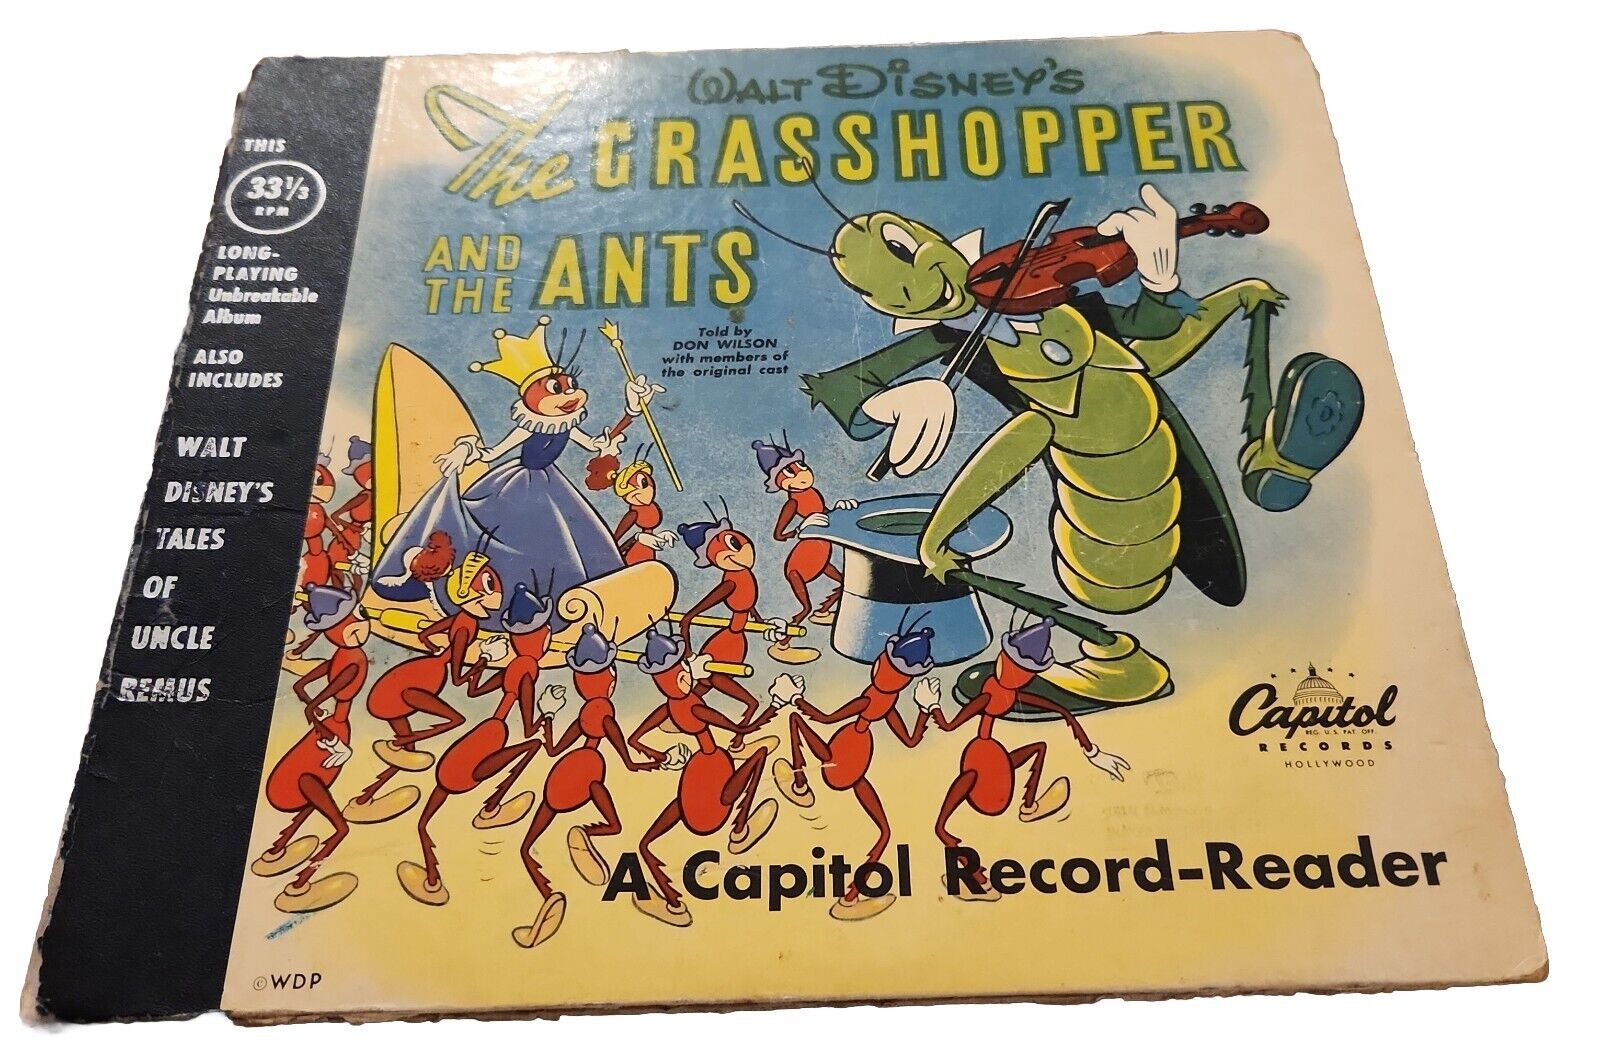 Vintage 1949 Walt Disney's Capitol Record Reader - Grasshopper And The Ants